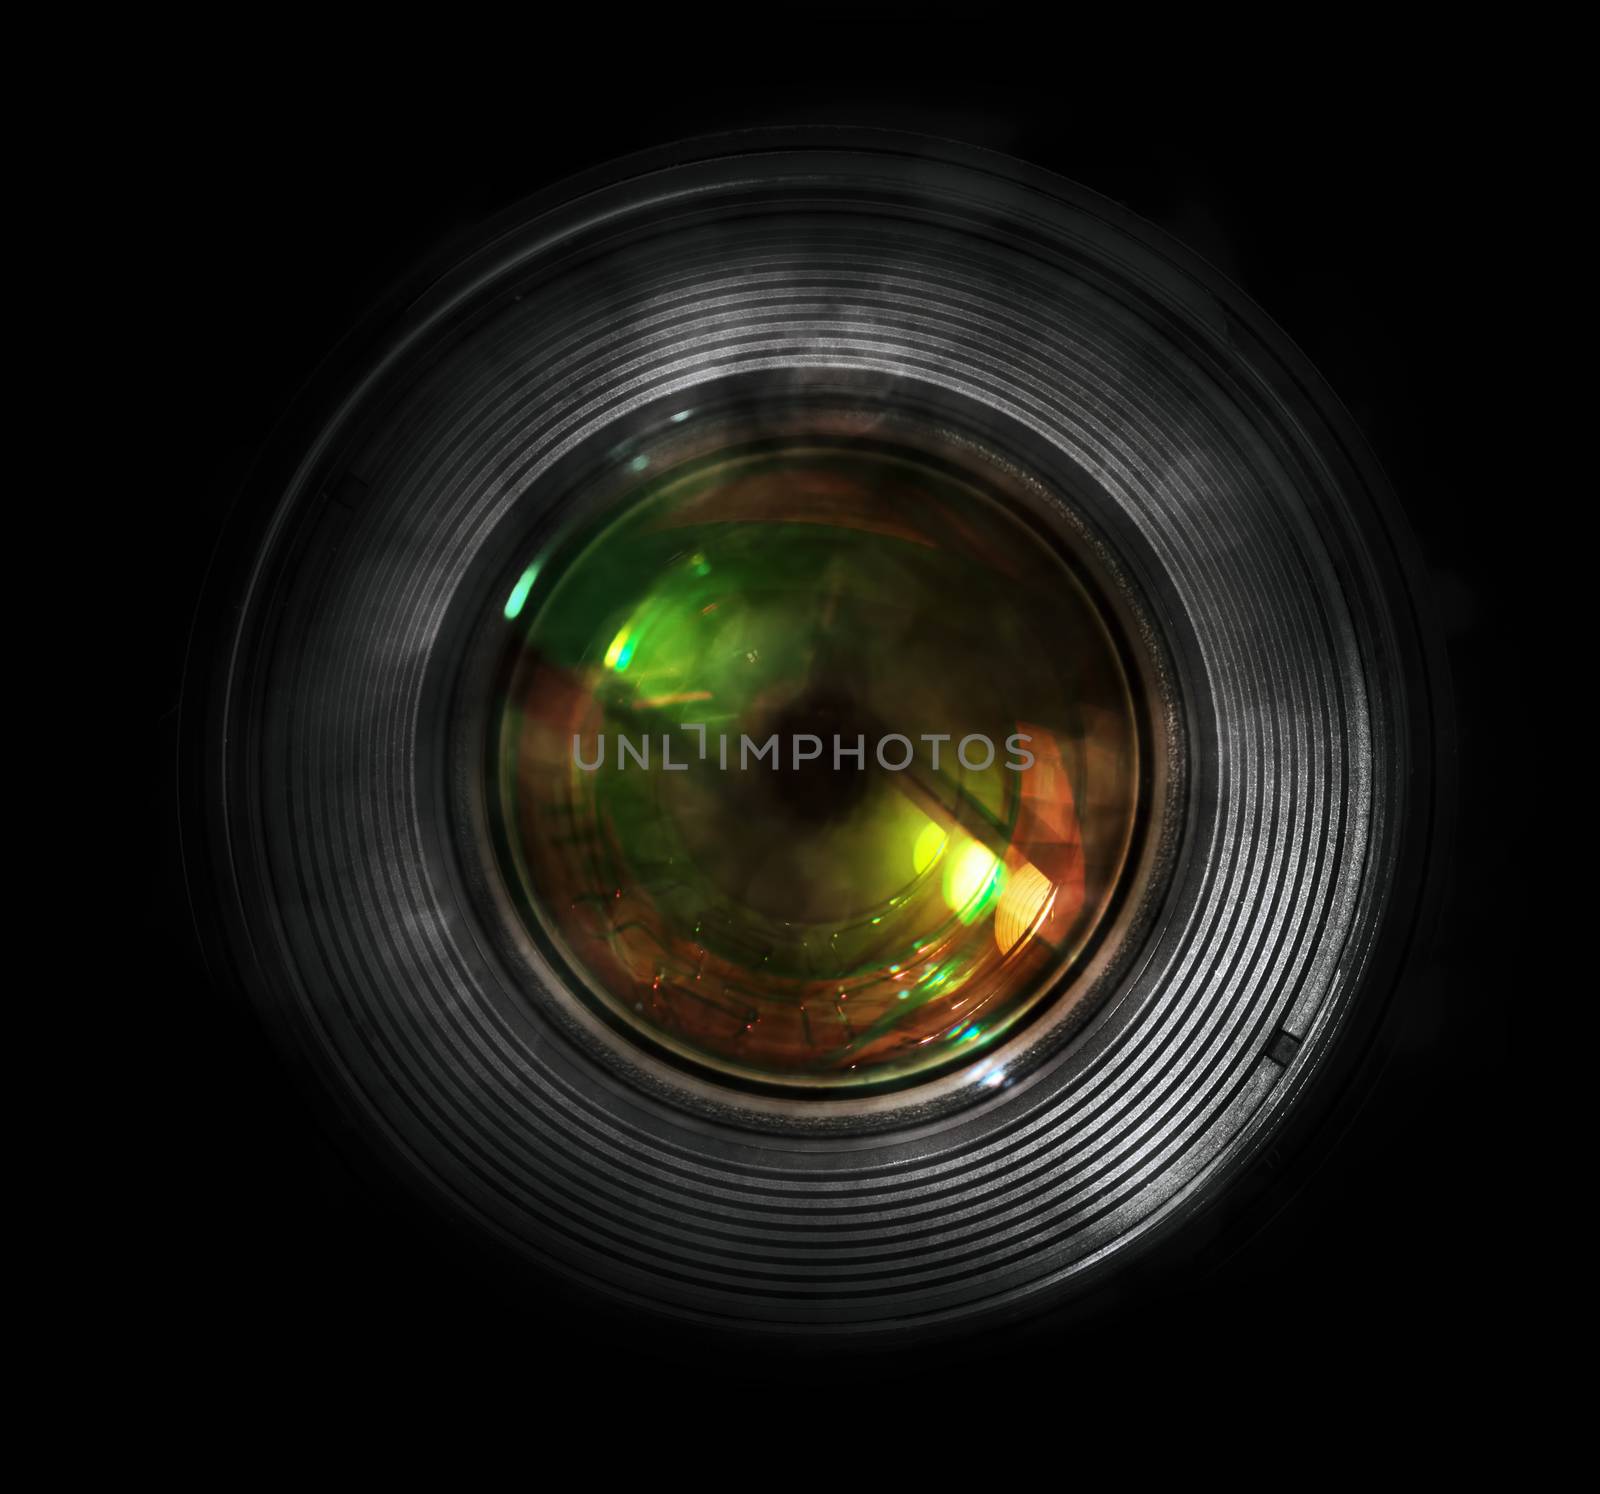 DSLR camera lens, front view by photocreo